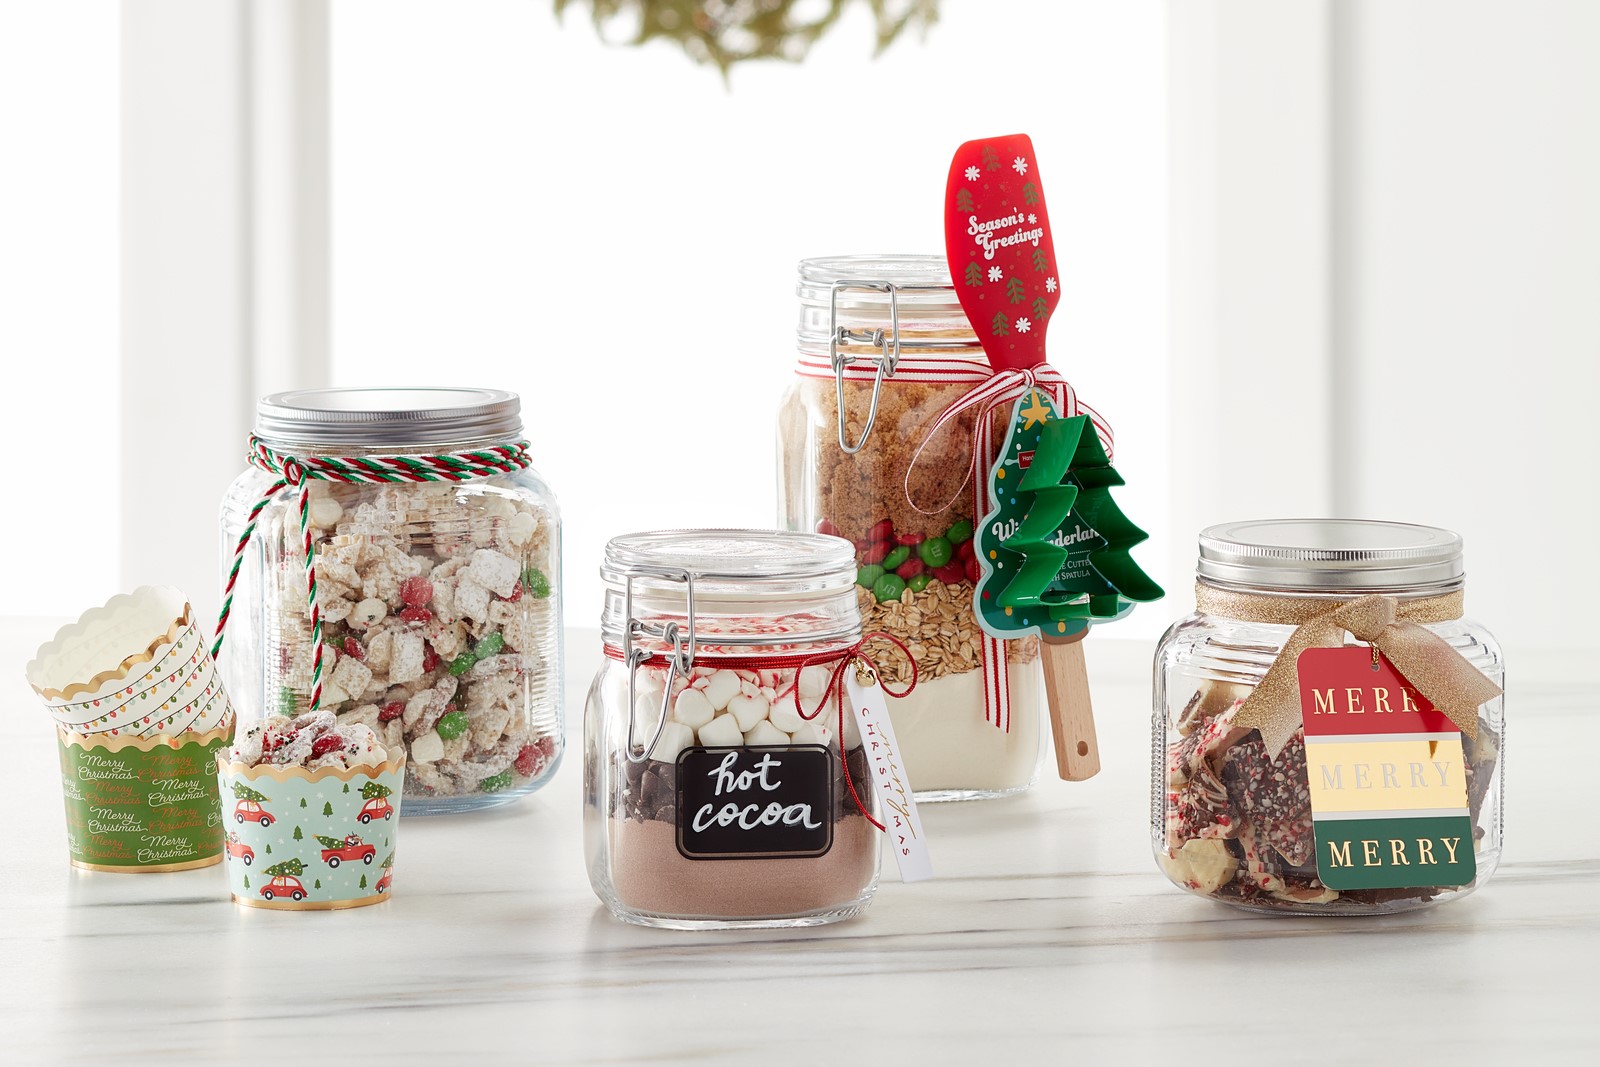 Festive Accents for Your Homemade Holiday Gifts | Container Stories